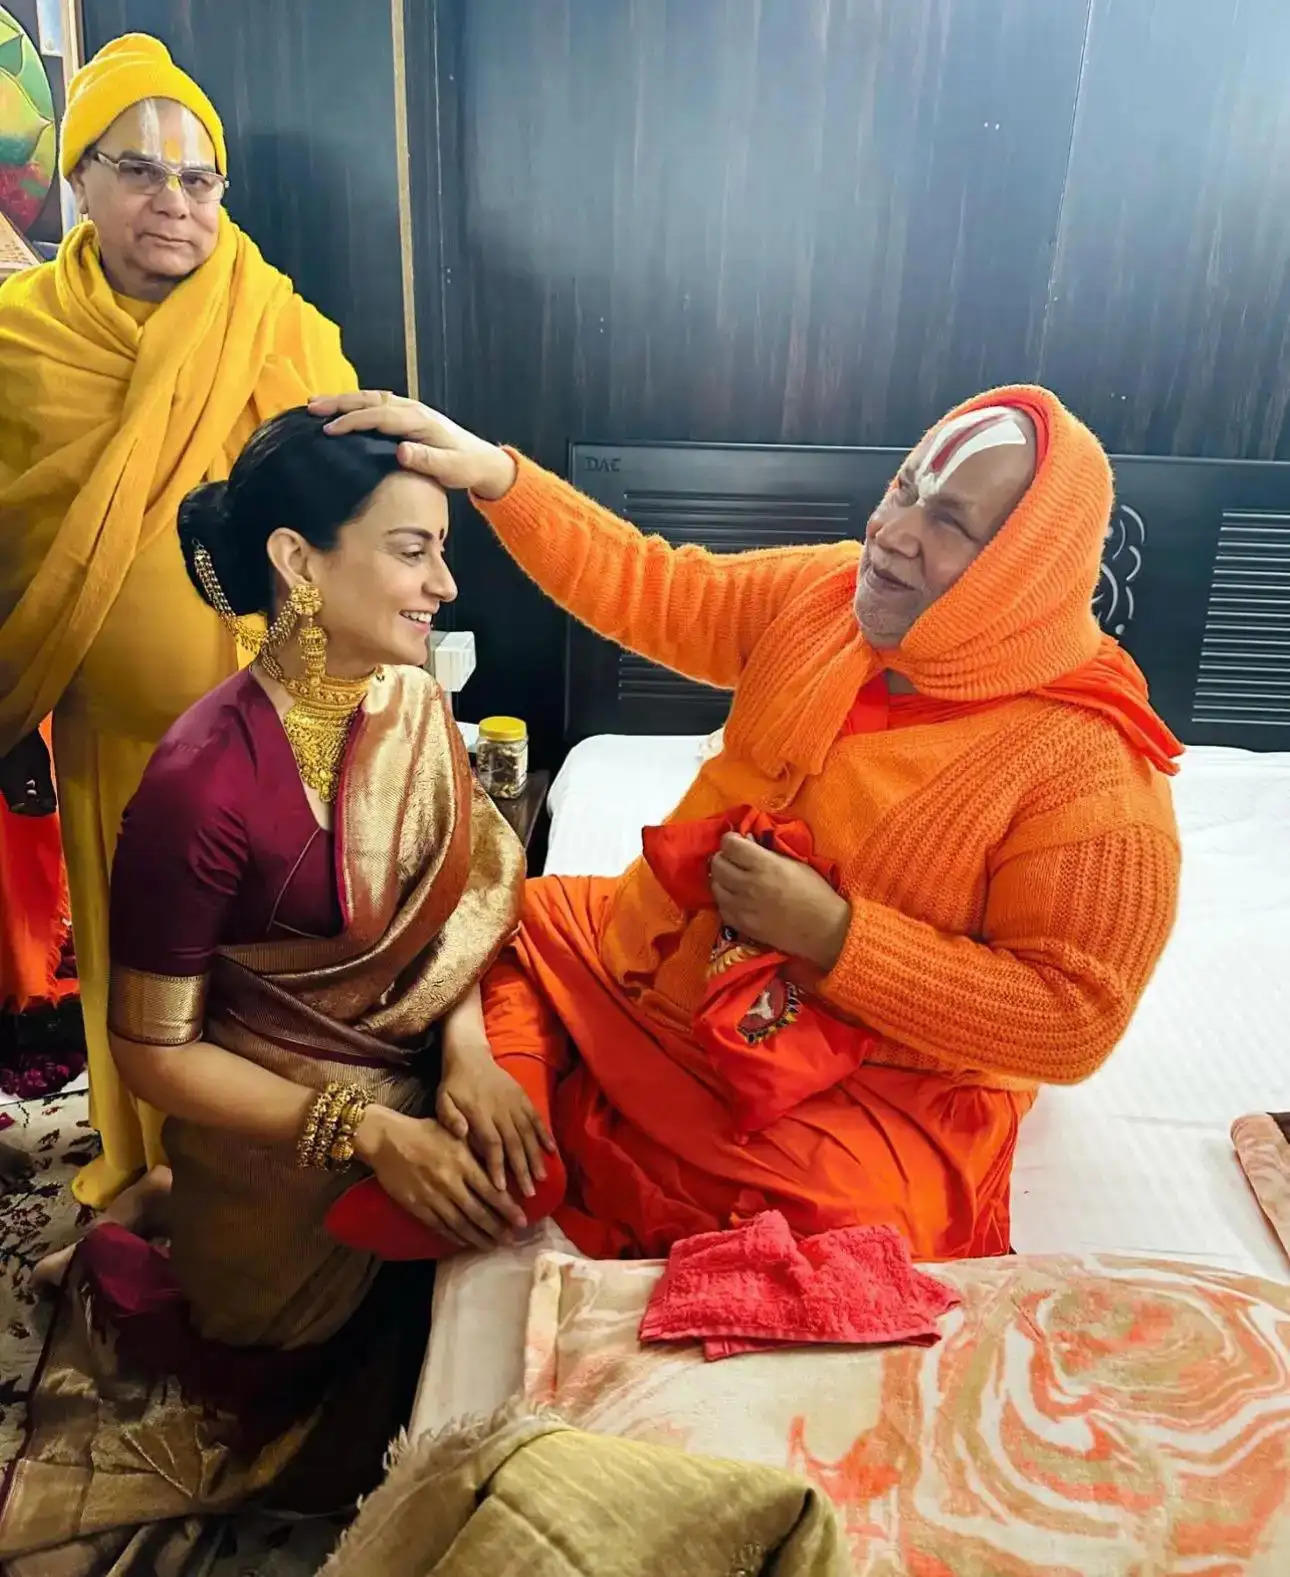 Kangana Ranaut is currently in Ayodhya for the Ram Temple concertation ceremony to be held on January 22.